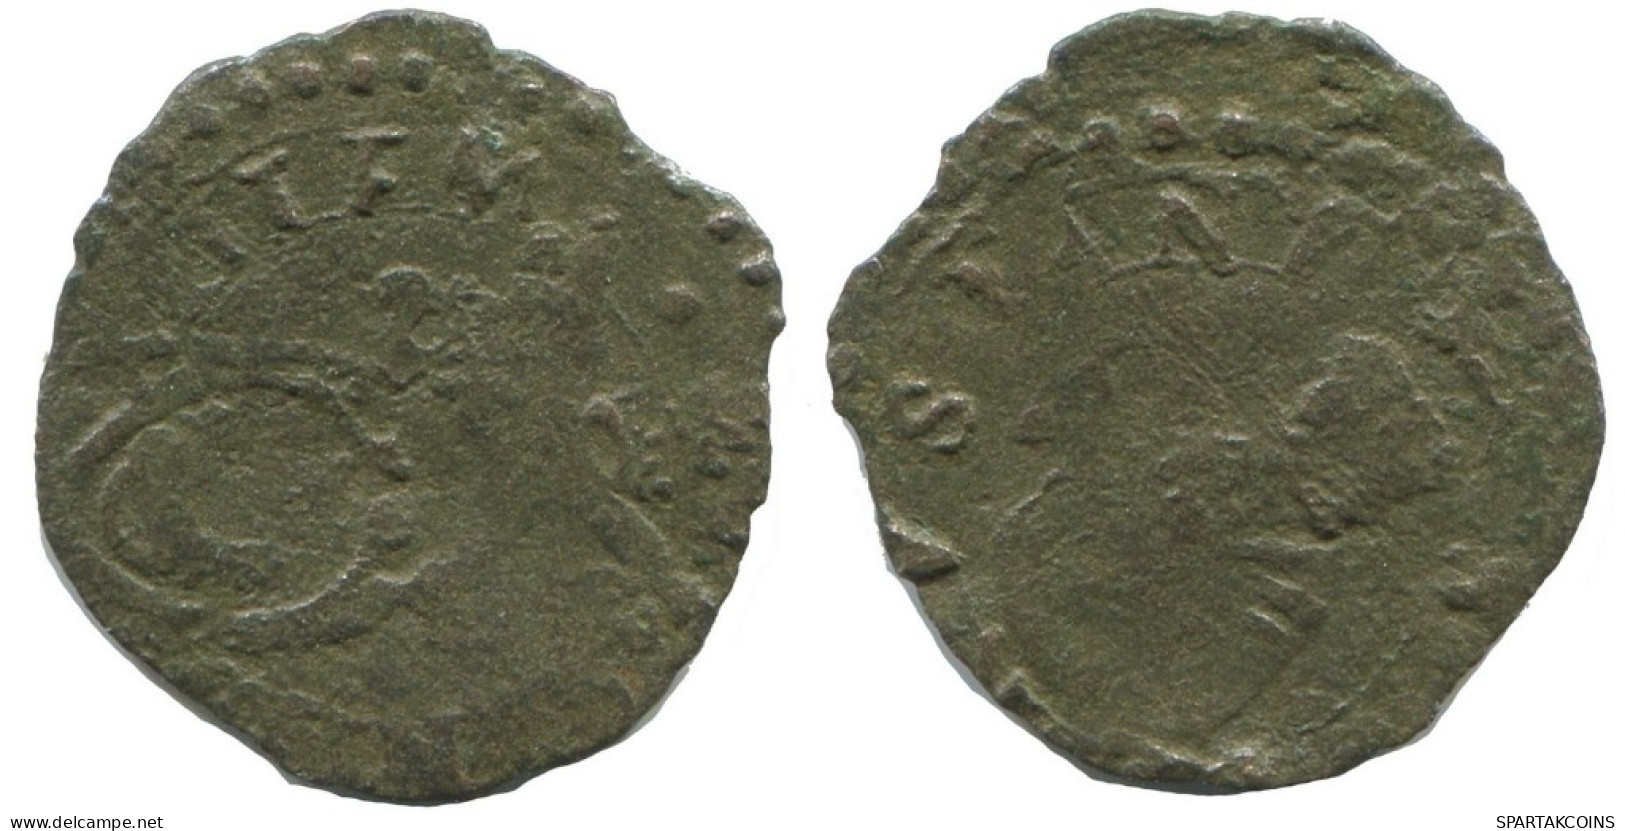 Authentic Original MEDIEVAL EUROPEAN Coin 0.5g/16mm #AC323.8.D.A - Other - Europe